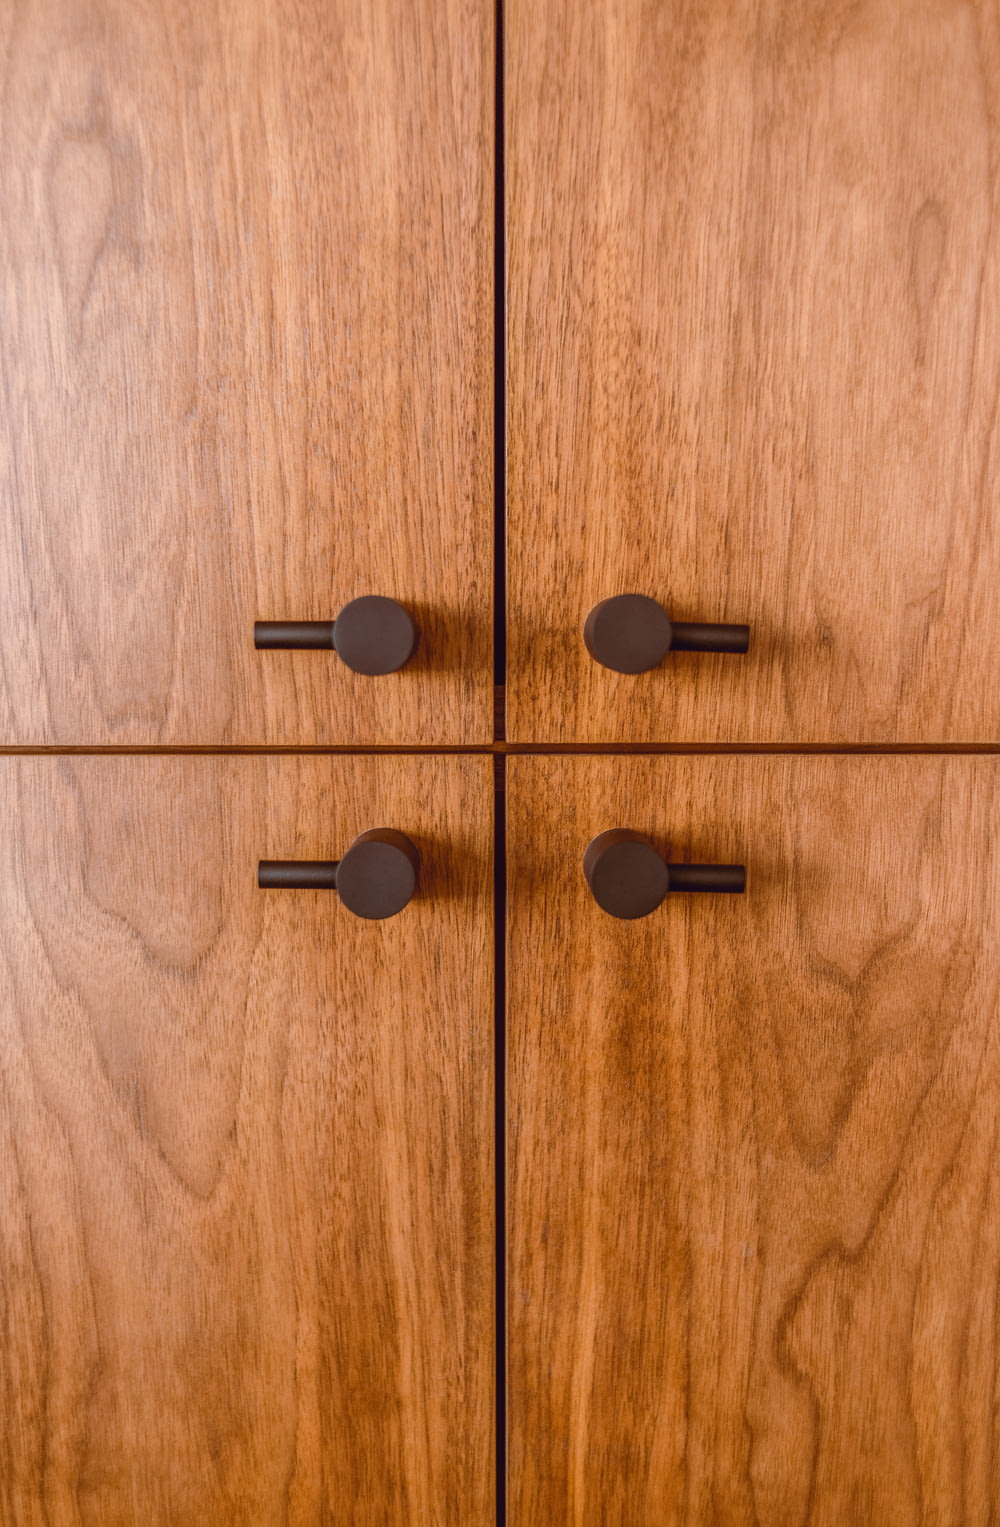 black round buttons on brown wooden surface